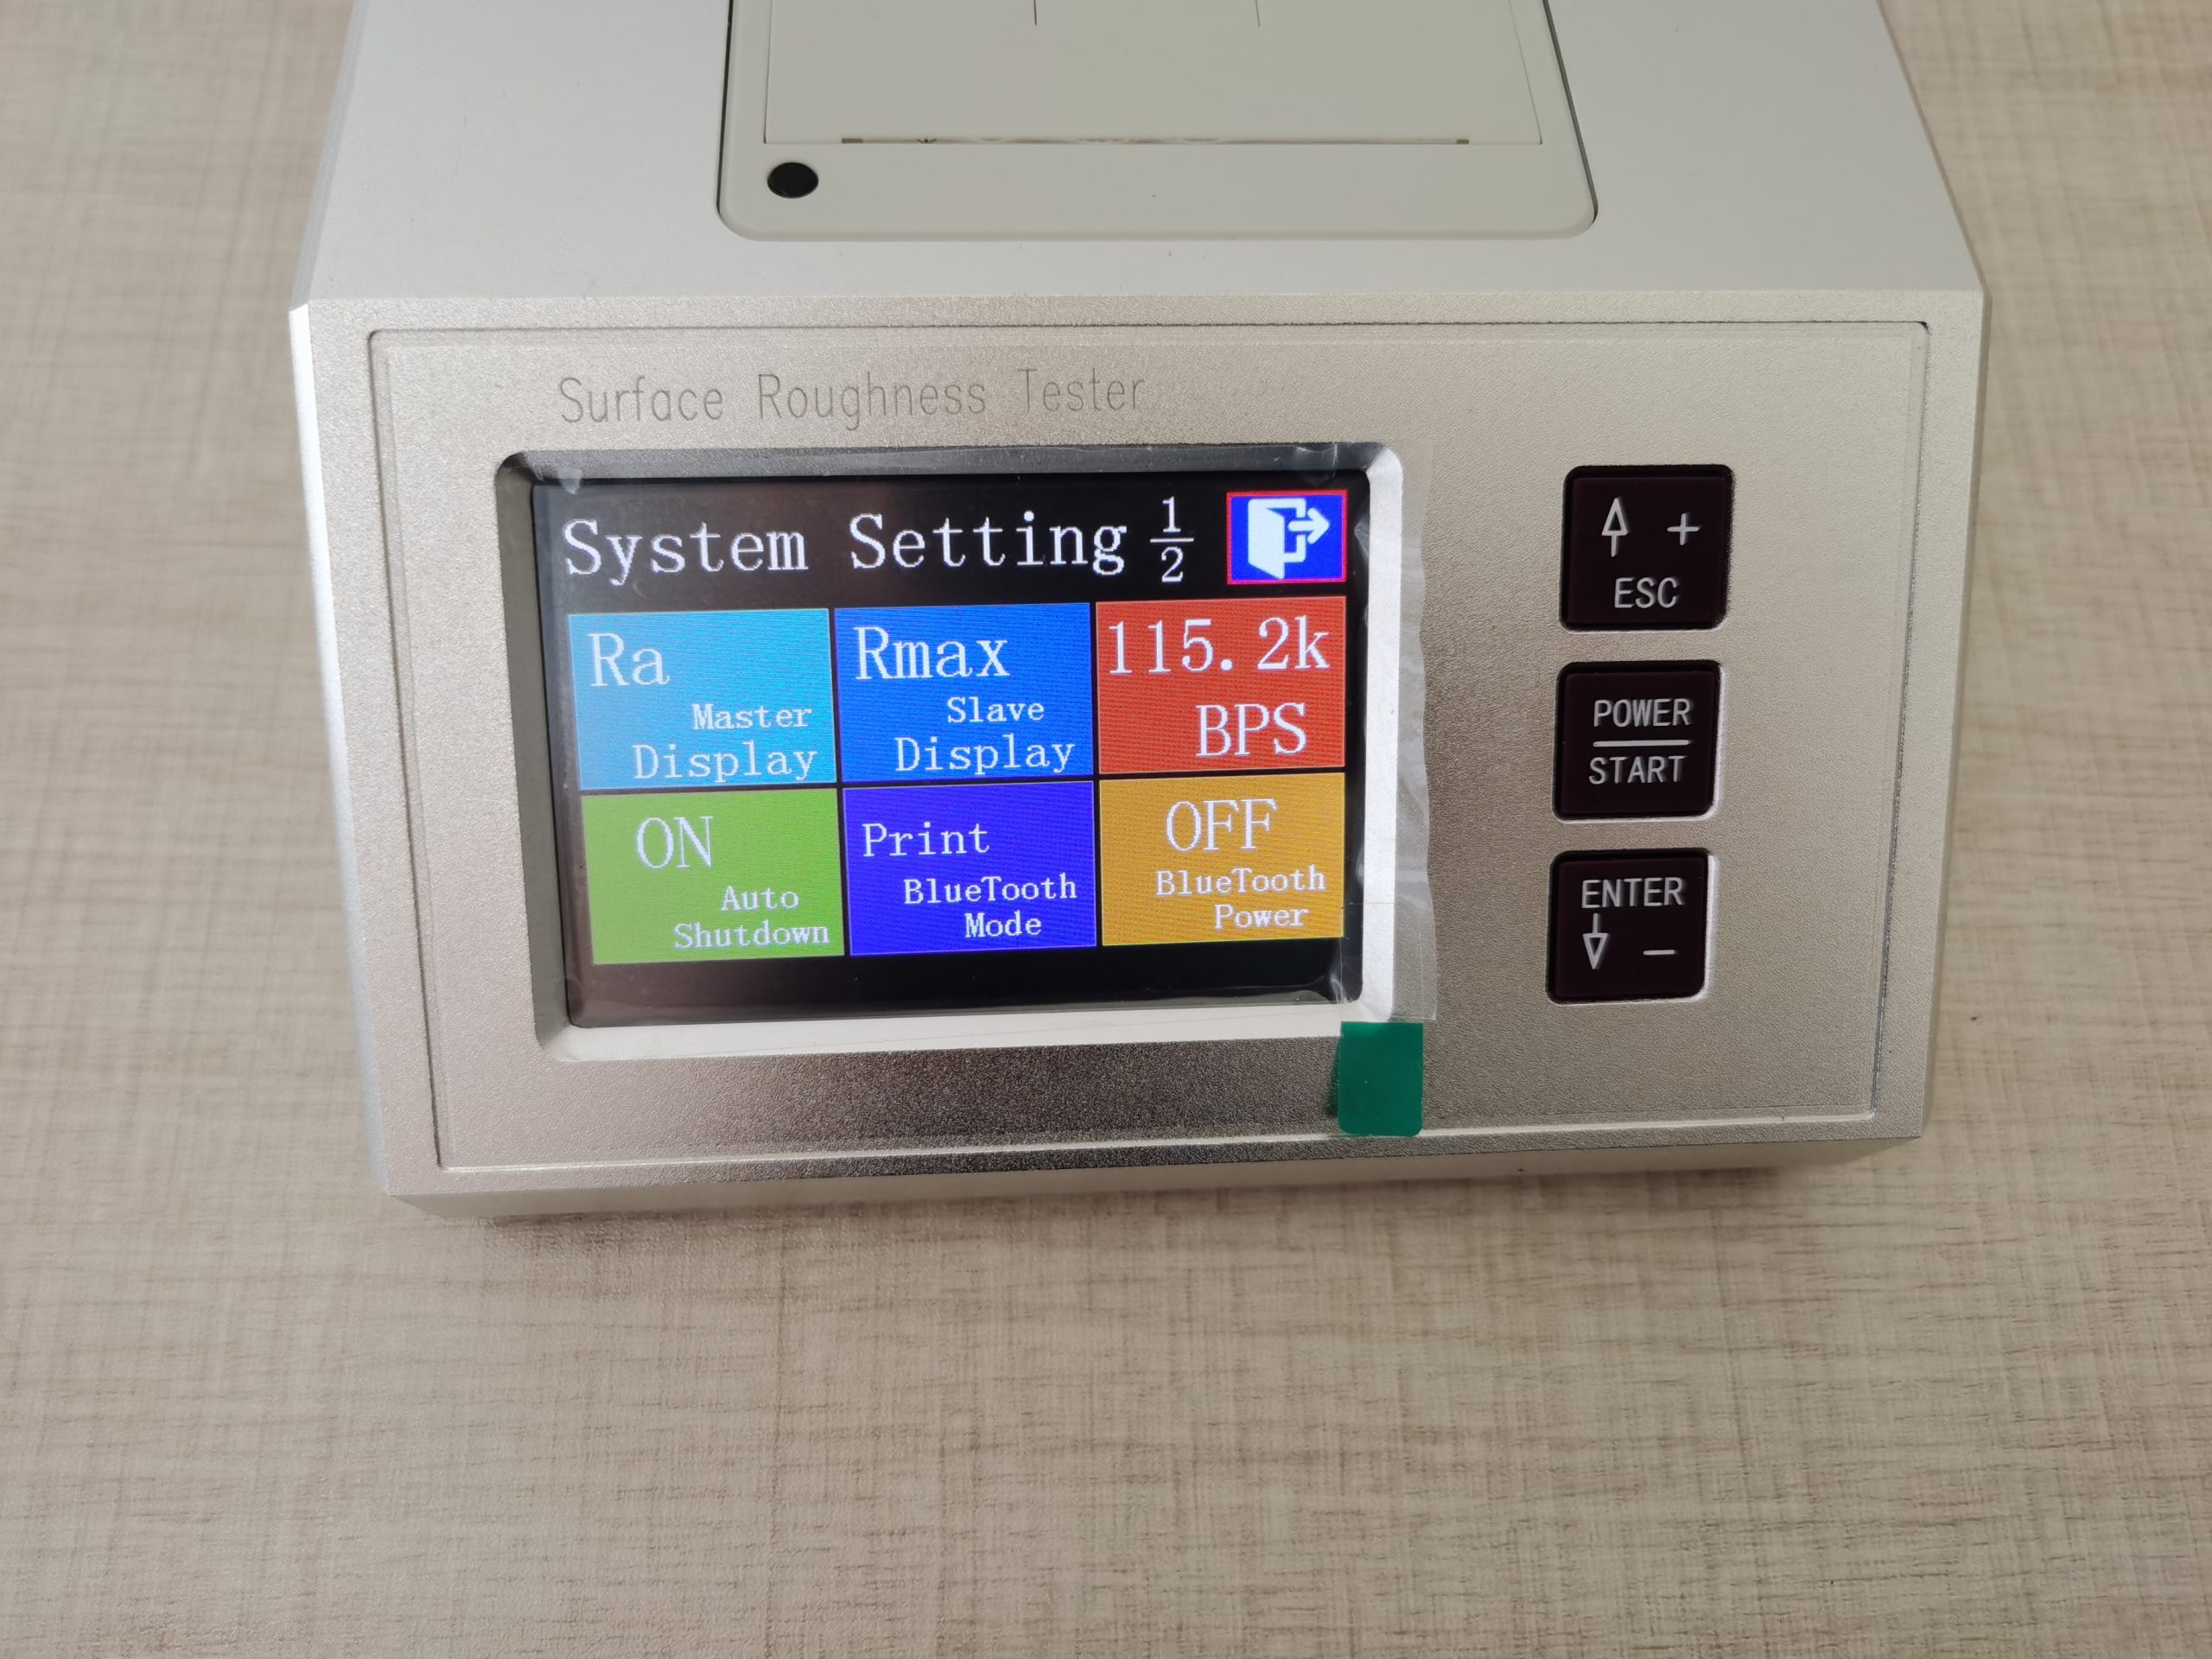 Surface Roughness Tester Digital Display System Settings